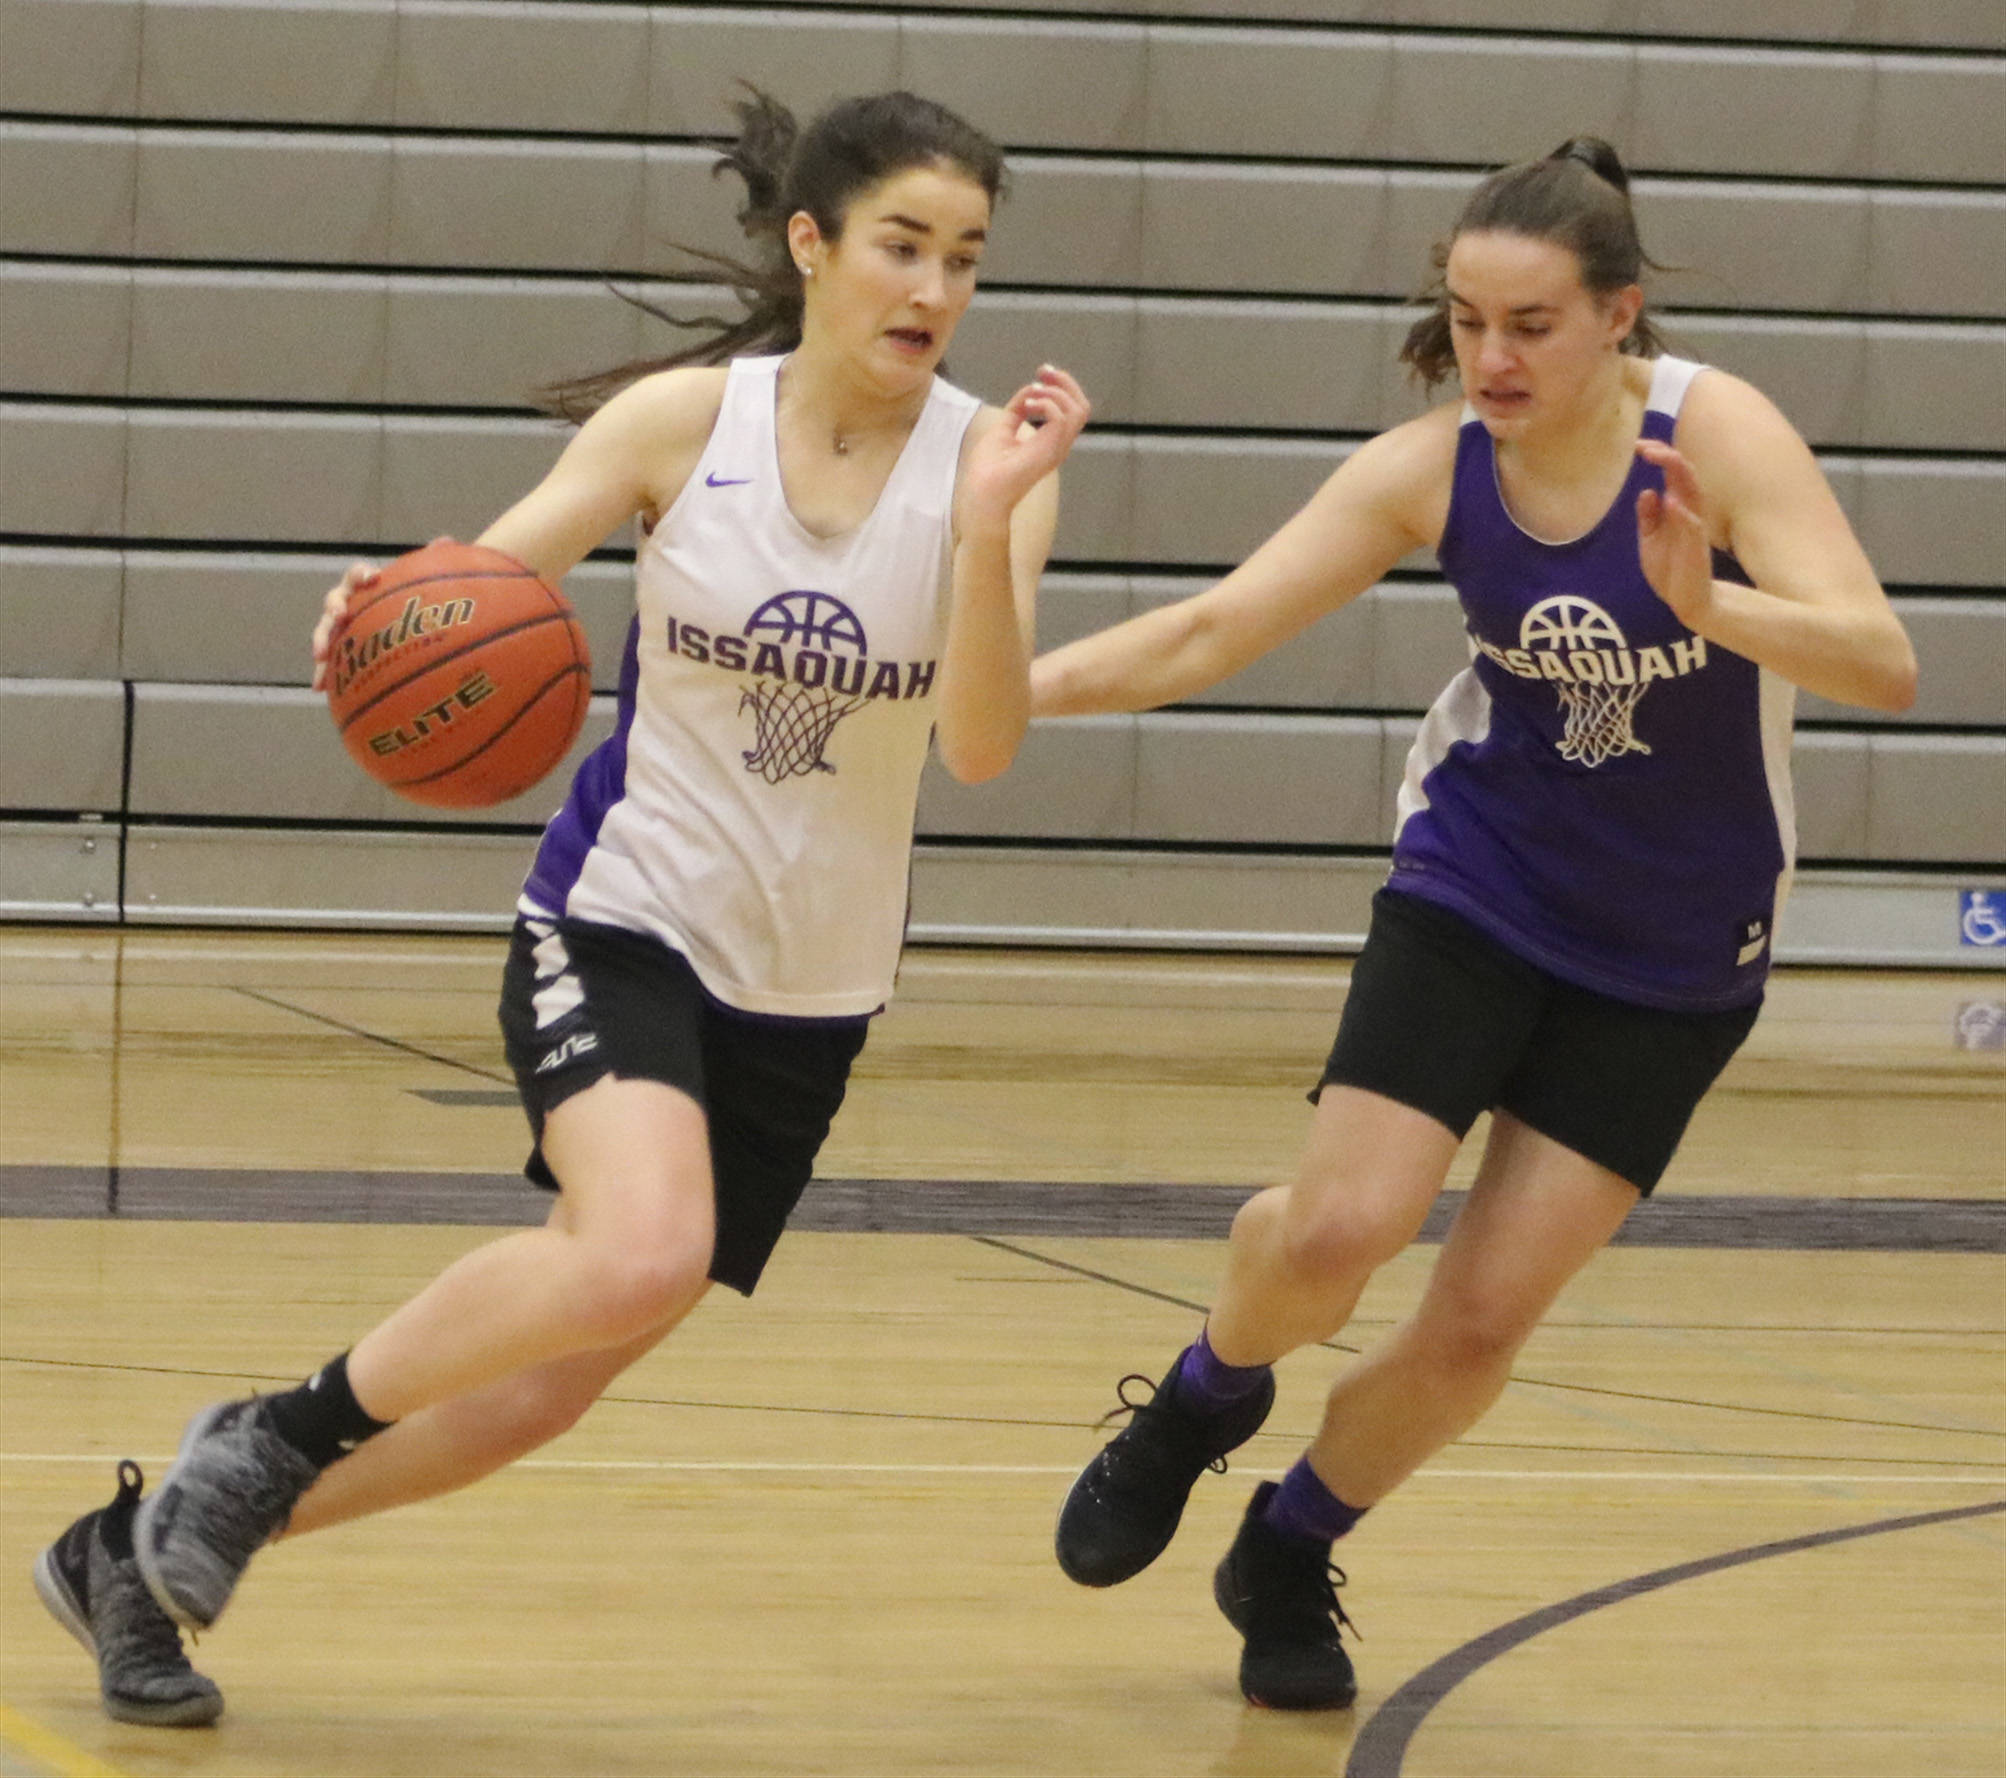 Issaquah forward Erin Schobbe (left) dribbles the ball during a scrimmage at practice on Dec. 2. Benjamin Olson/staff photo